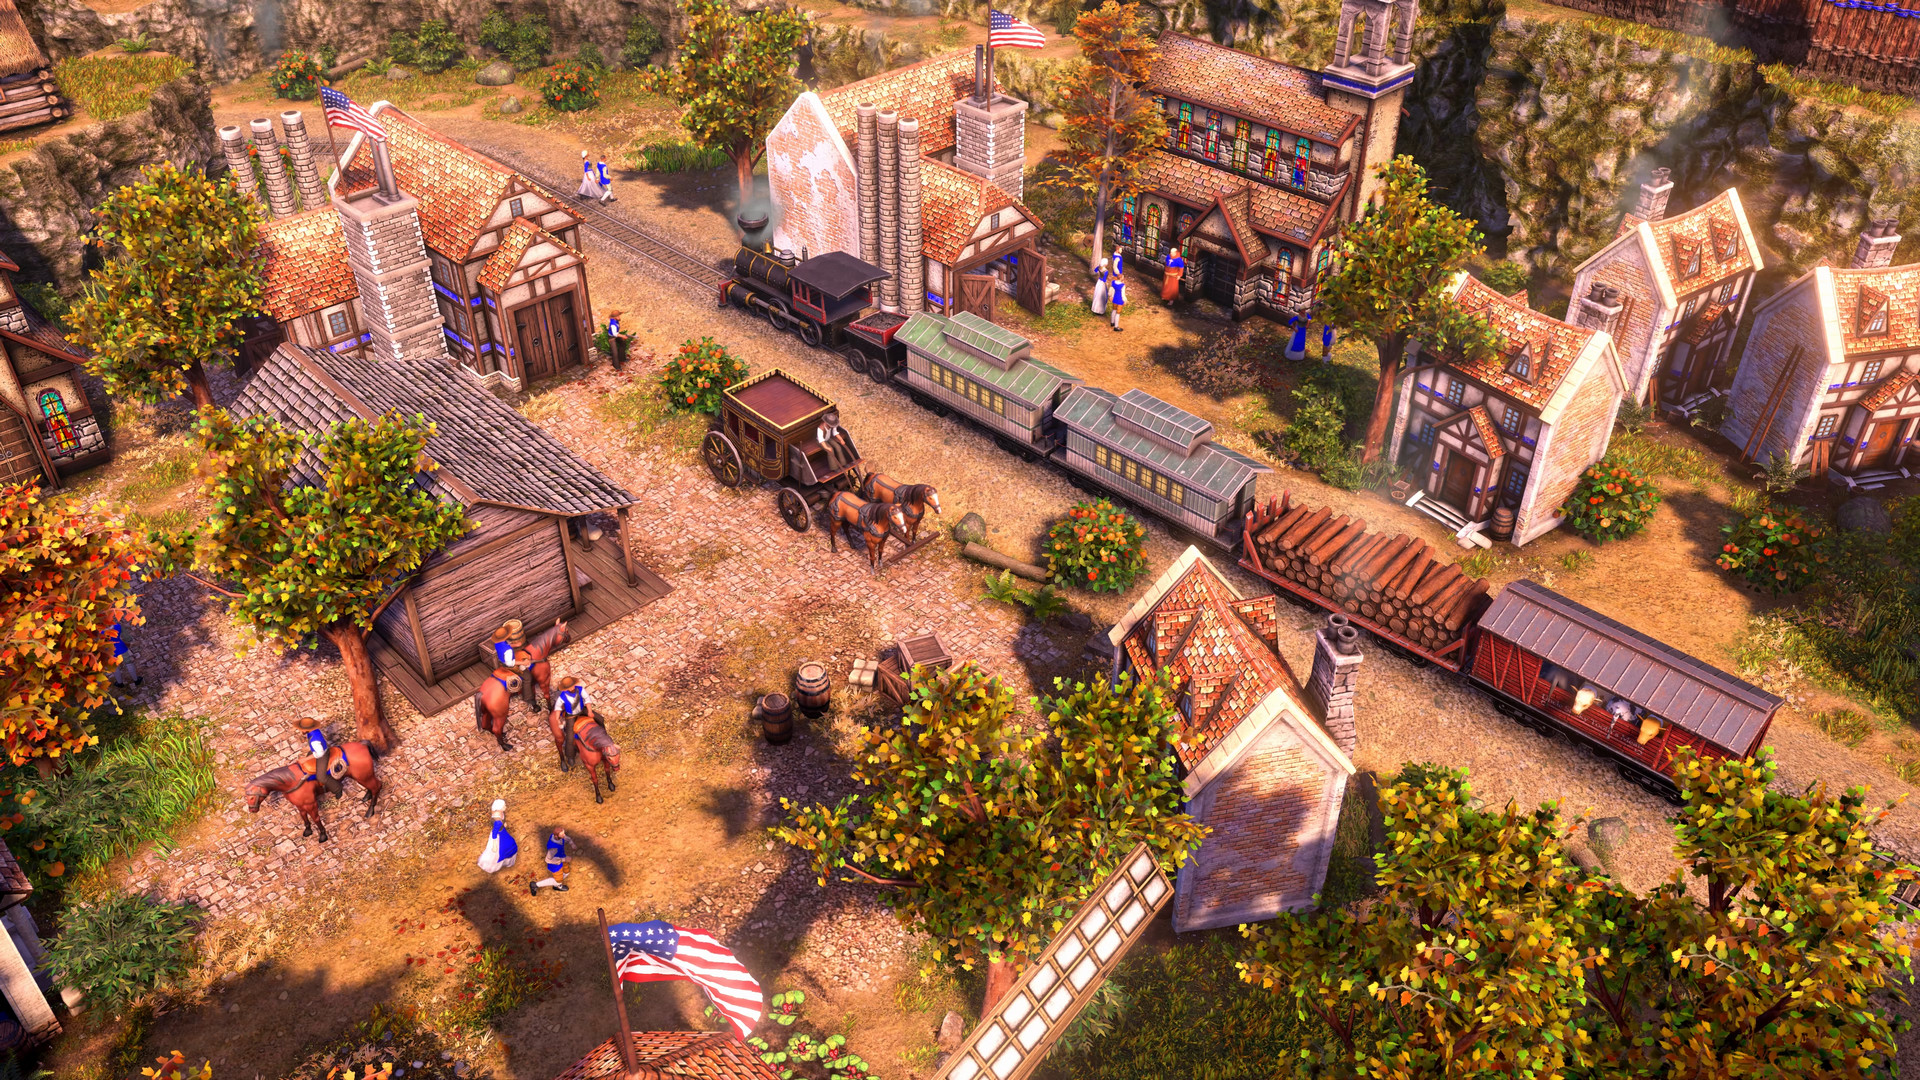 Age of Empires III: Definitive Edition Free Download